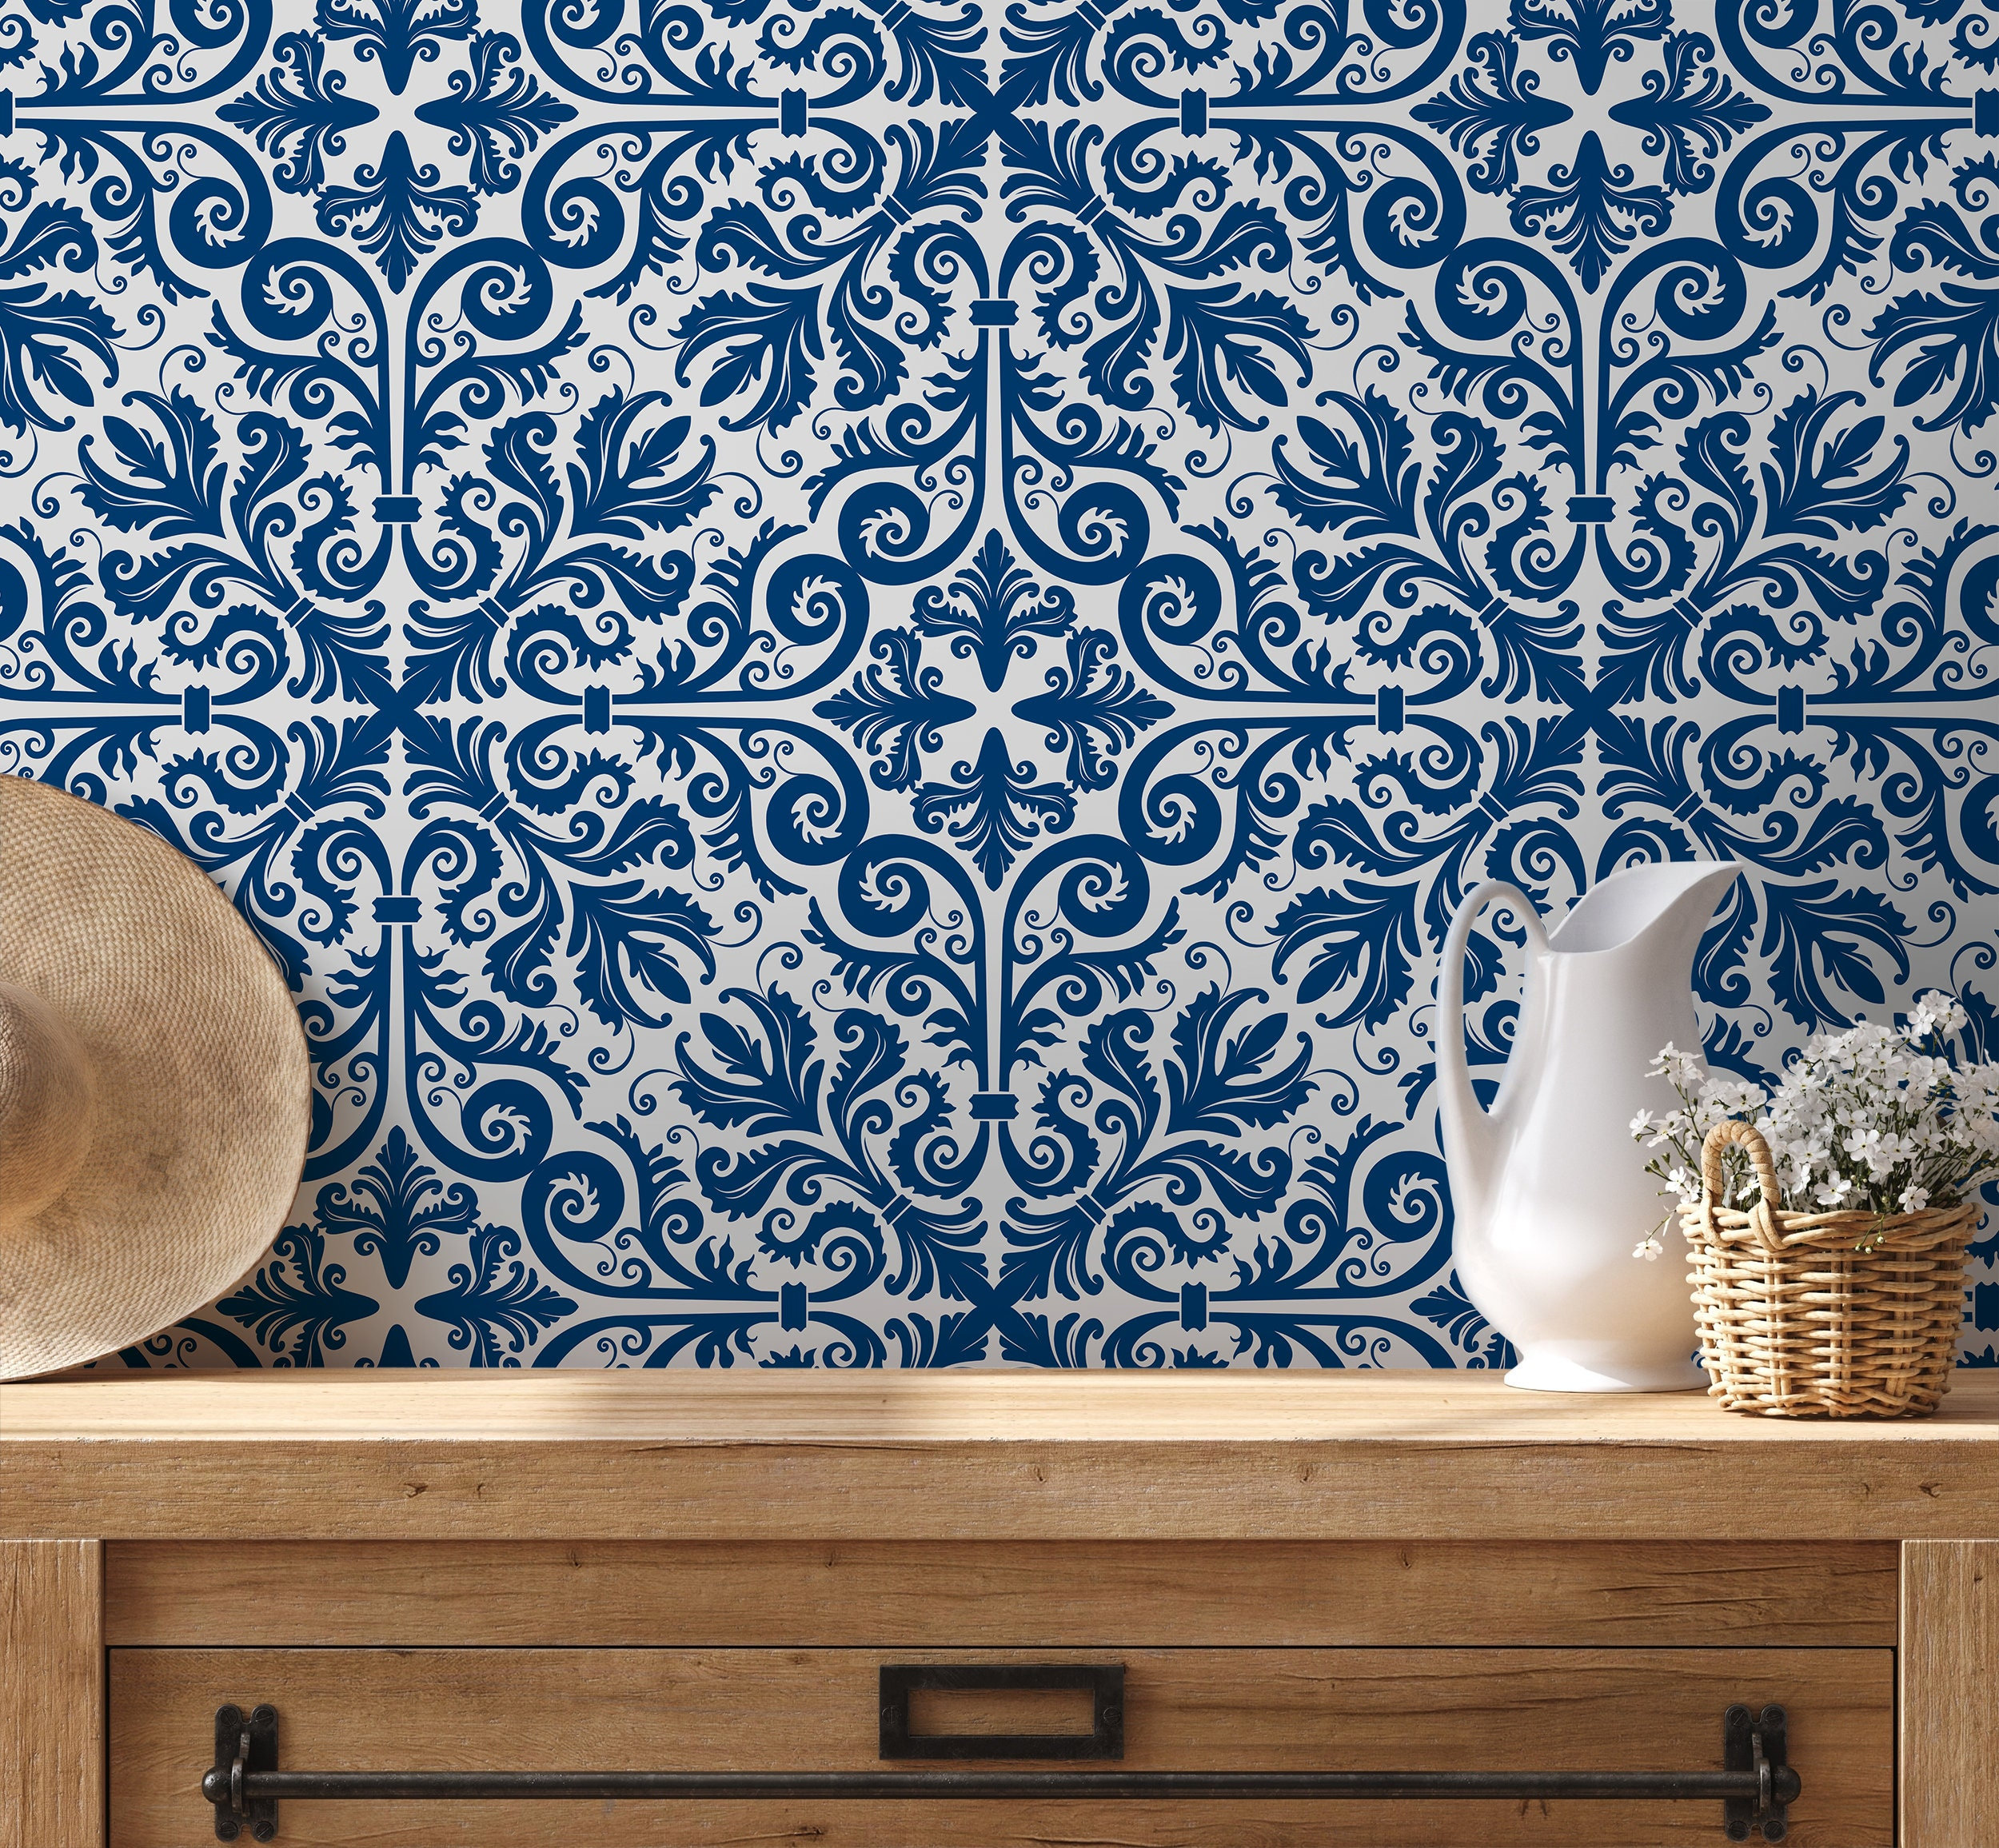 Blue Moroccan Tile Repositionable Removable Wallpaper Peel   Etsy